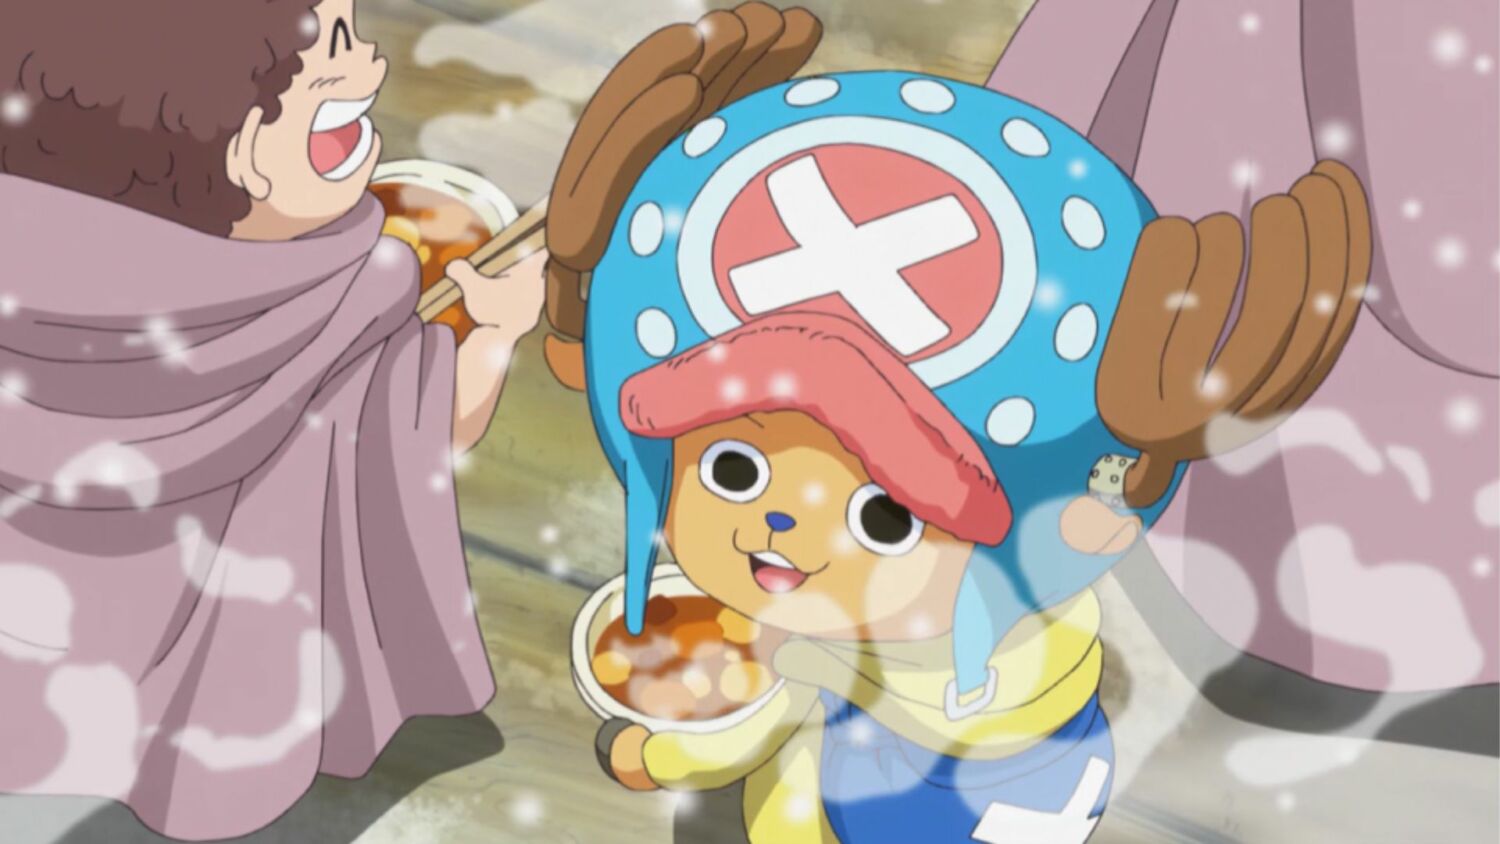 Behind the Scenes Peek: How 'One Piece' Plans to Bring Chopper to Life in Upcoming Live-Action Season